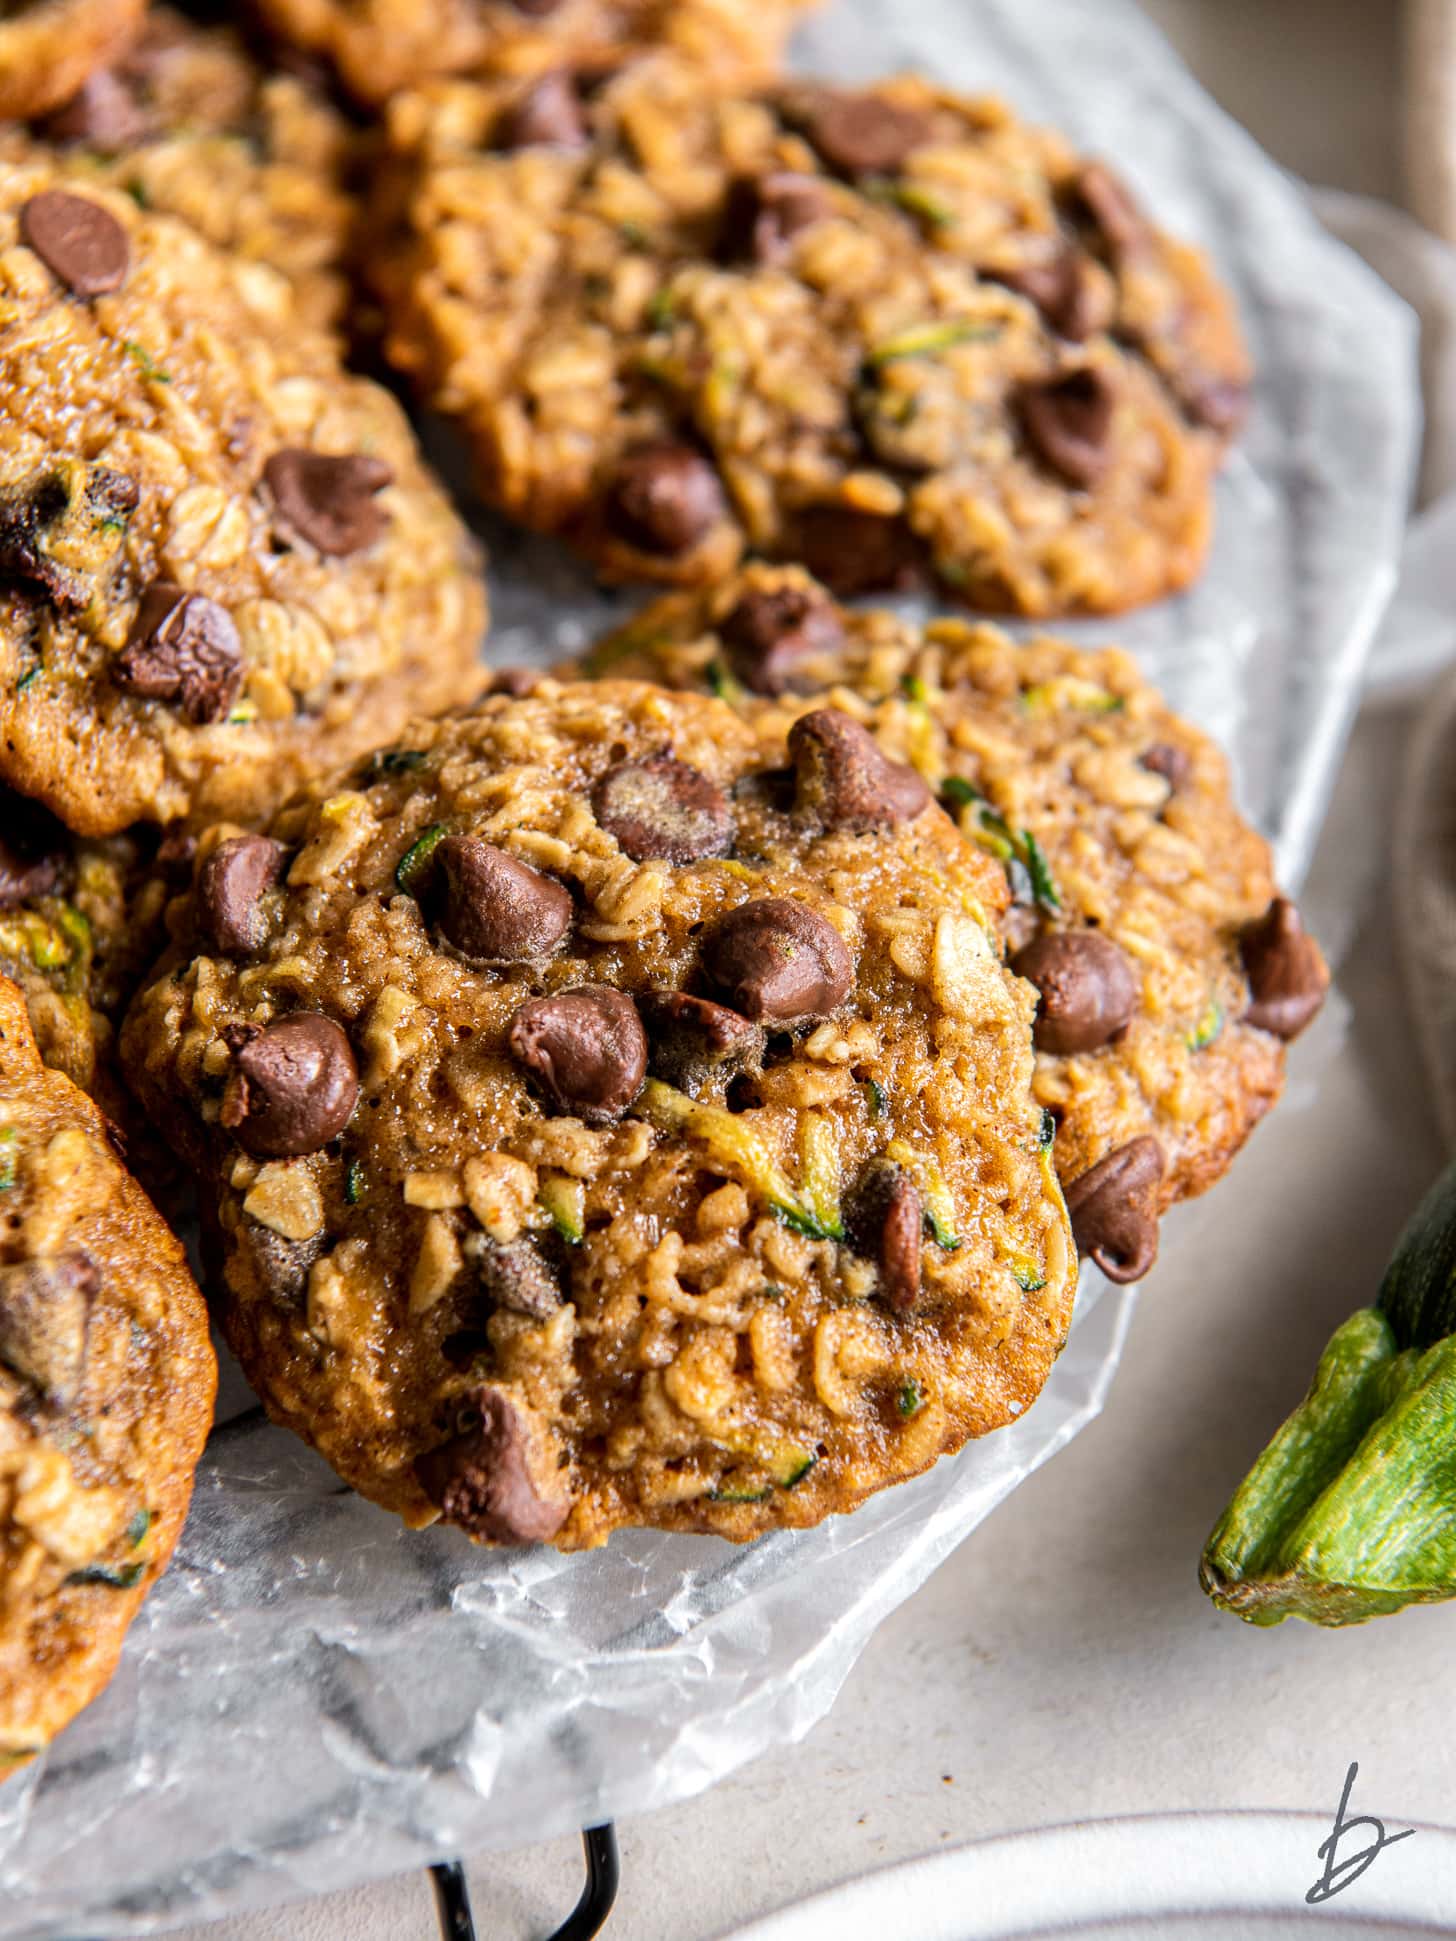 pile of chewy zucchini cookies with chocolate chips and oats.